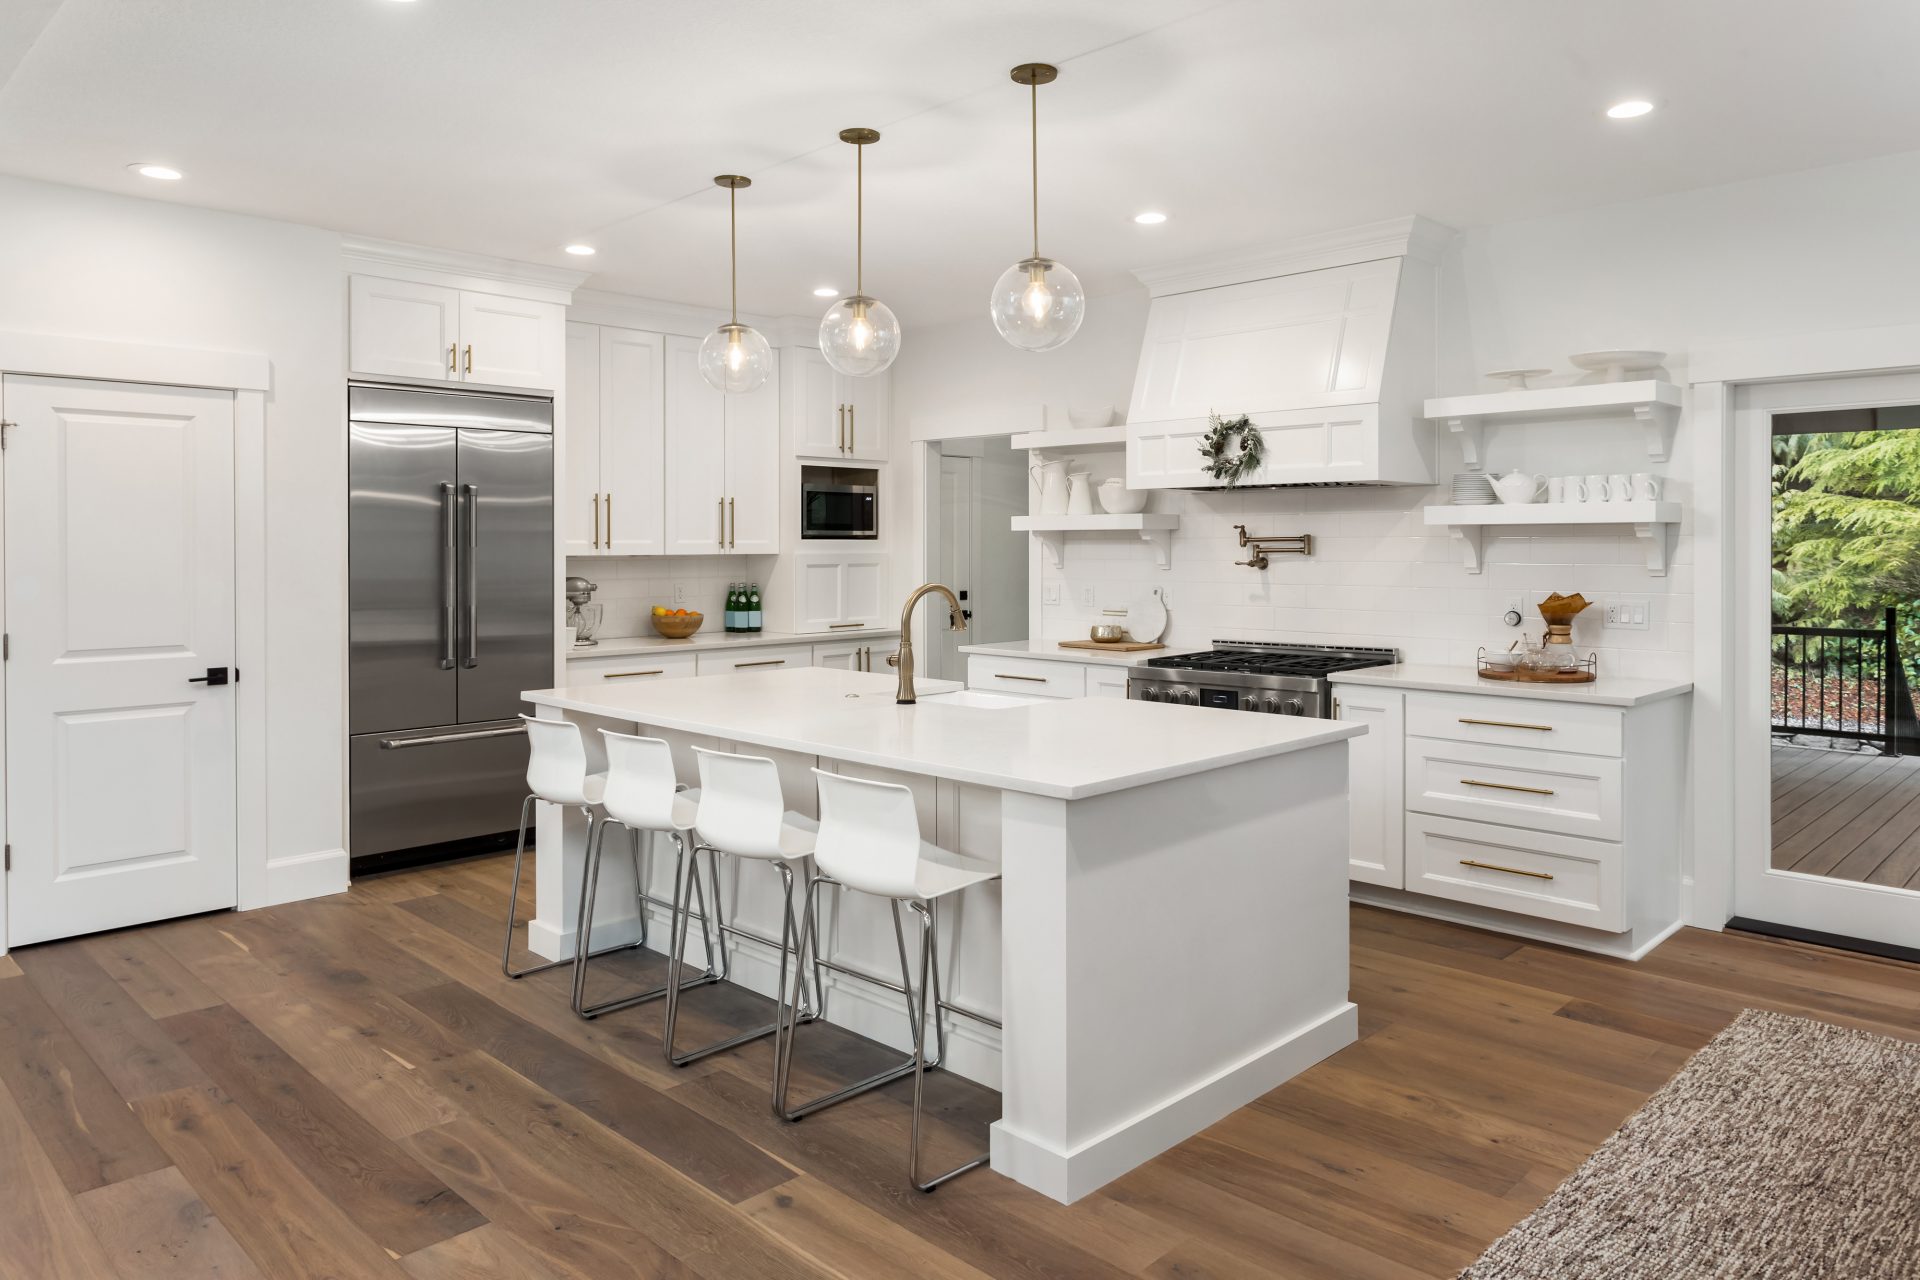 15 Reasons To Design Kitchens With Shaker Cabinets In 2021 Cabinetcorp